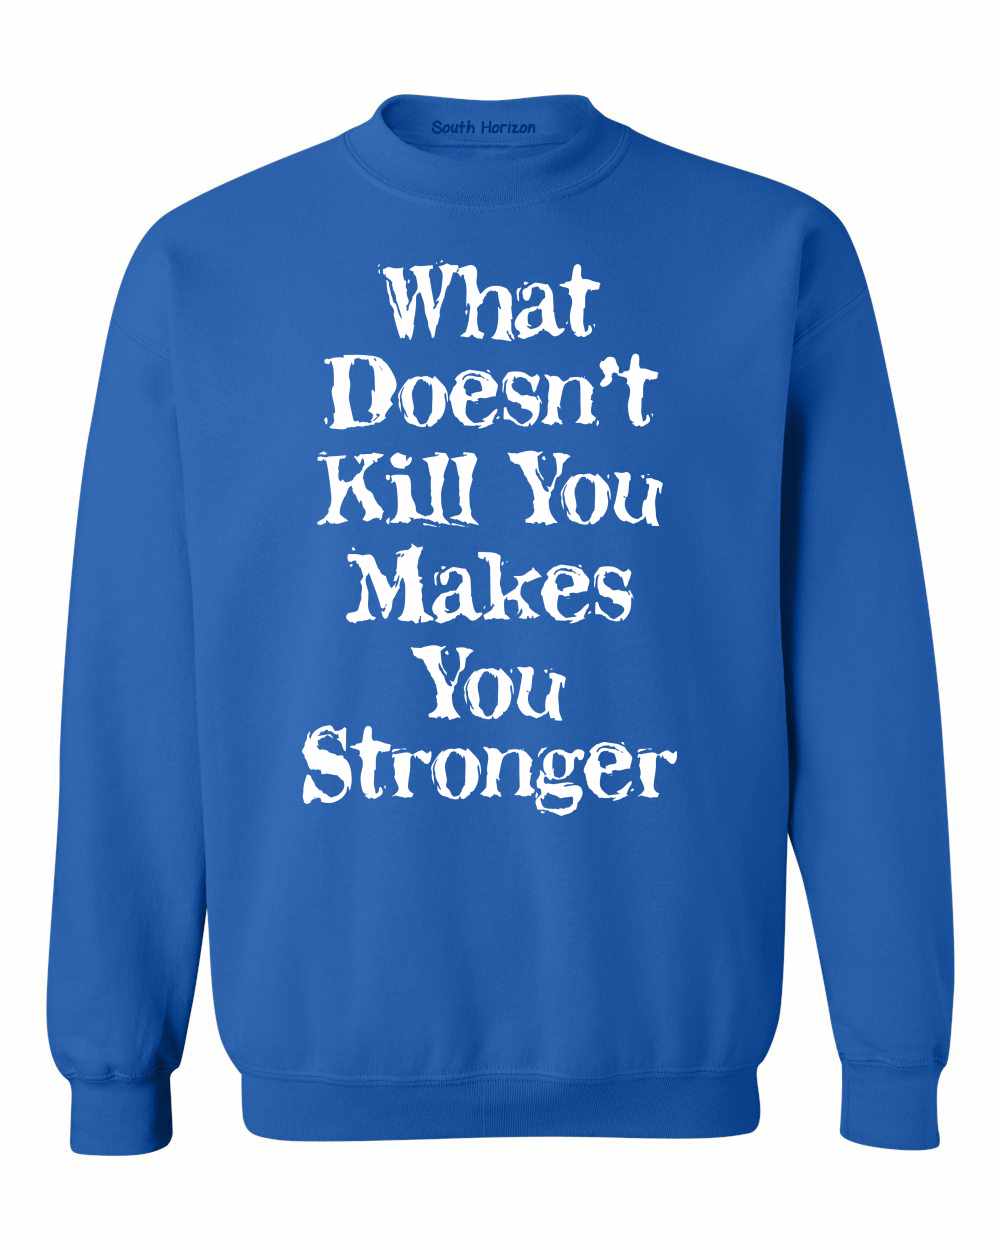 What Doesn't Kill You Makes You Stronger on SweatShirt